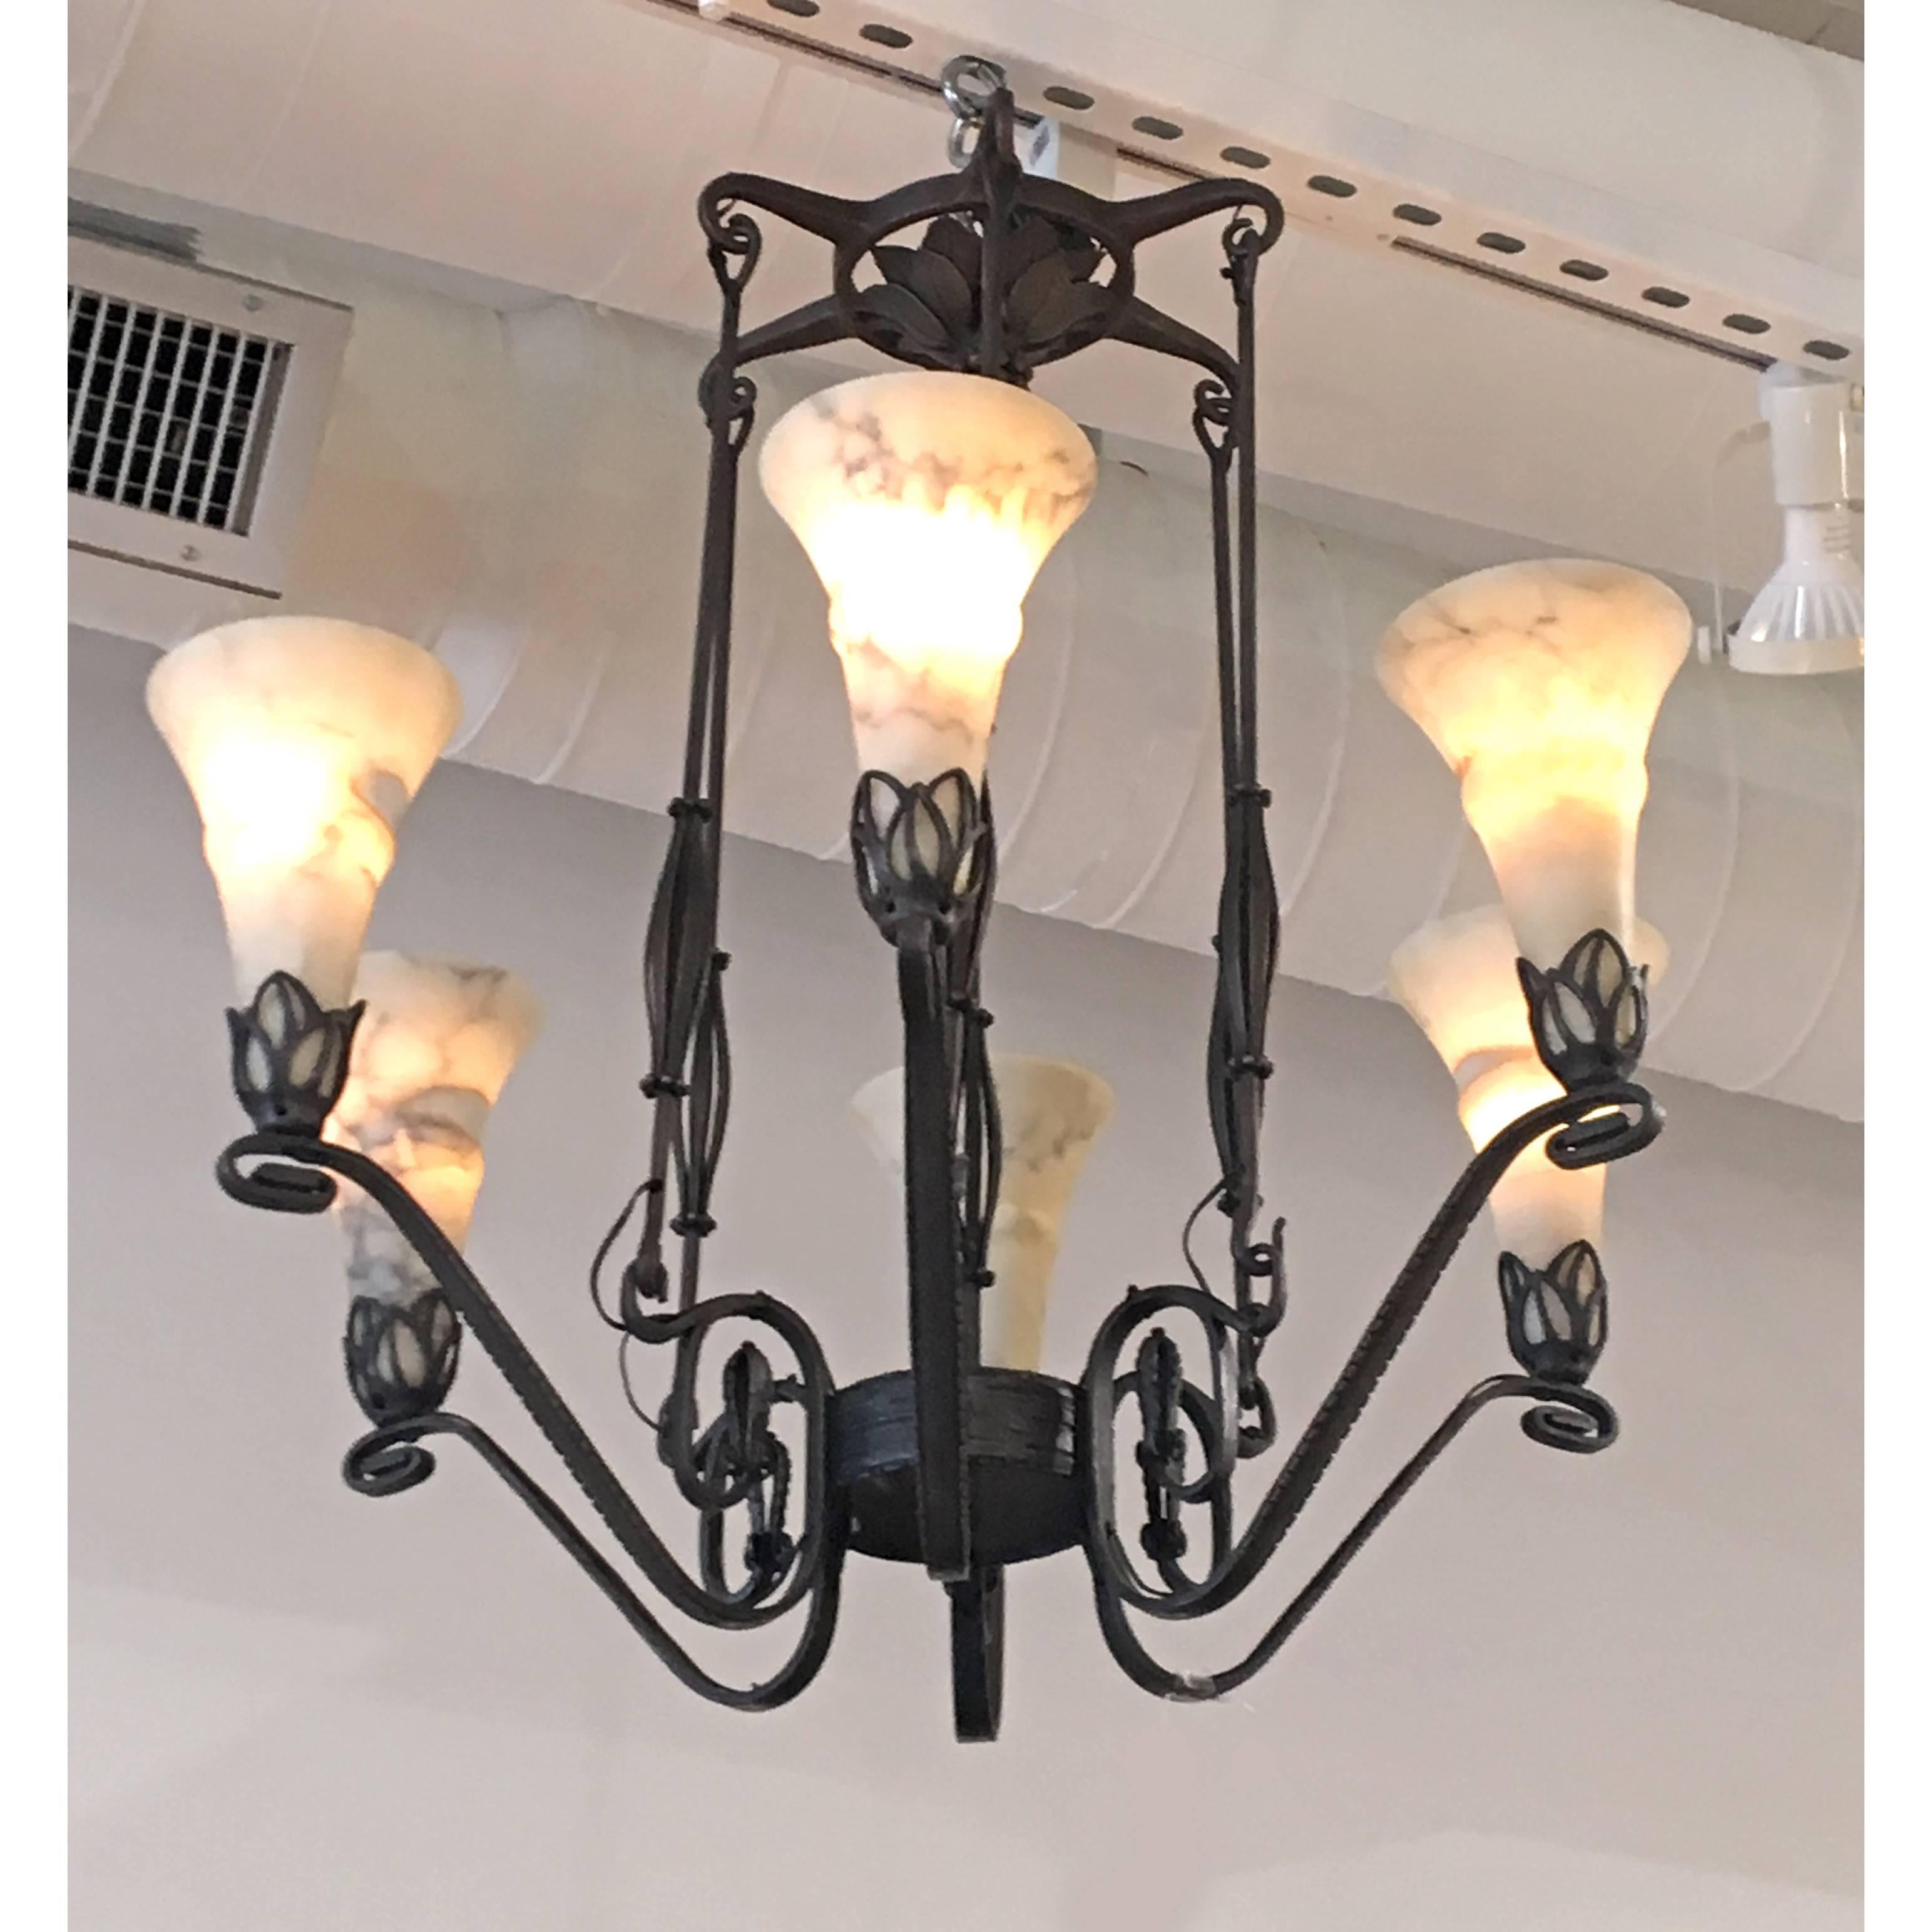 A beautiful and decorated wrought iron chandelier with alabaster shades by E. Brandt.
Made in France,
circa 1920.
Signed: 